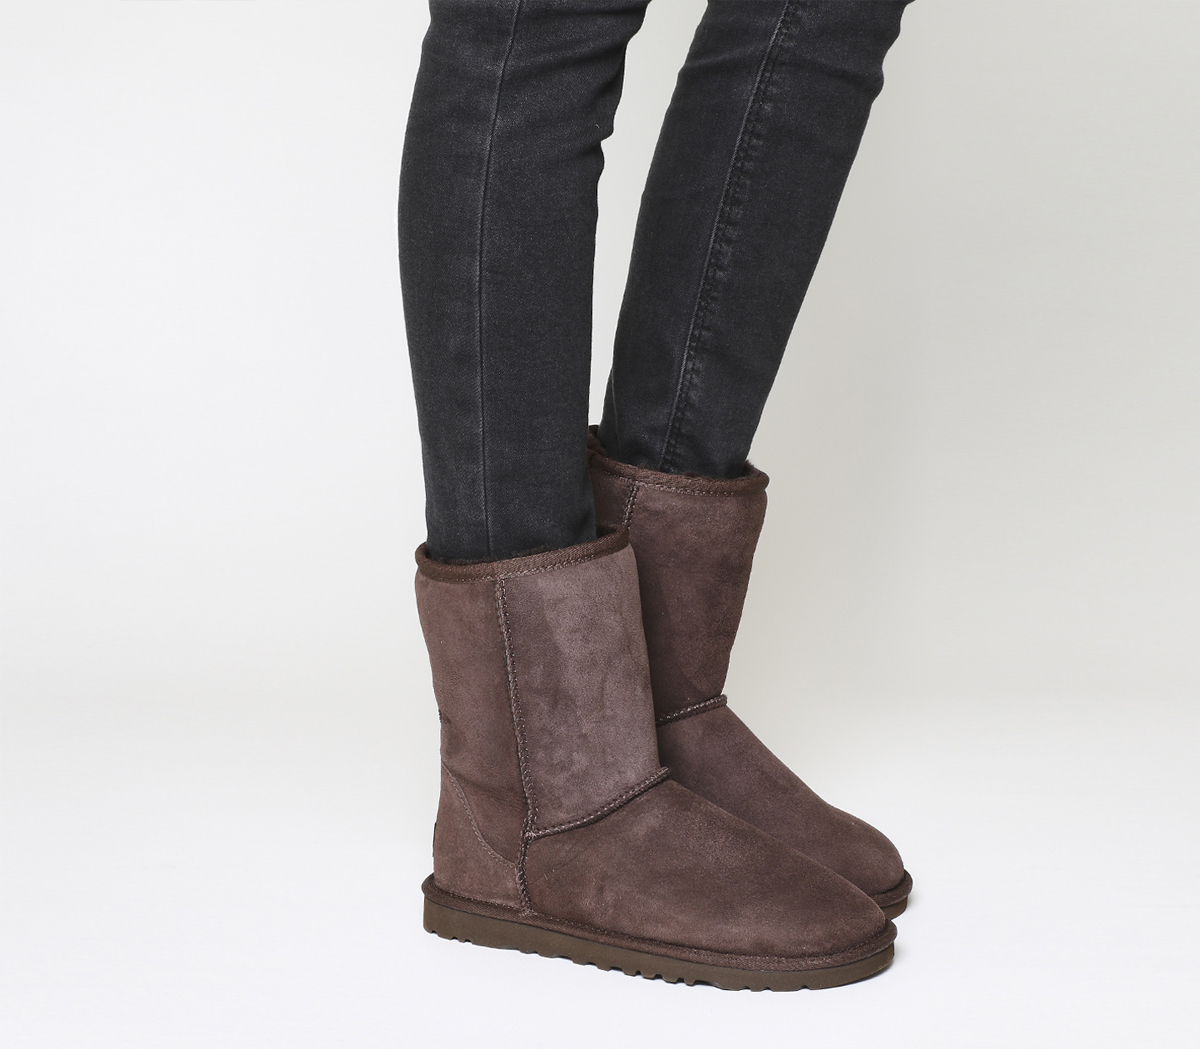 UGG Classic Short Boots Chocolate - Women's Ankle Boots